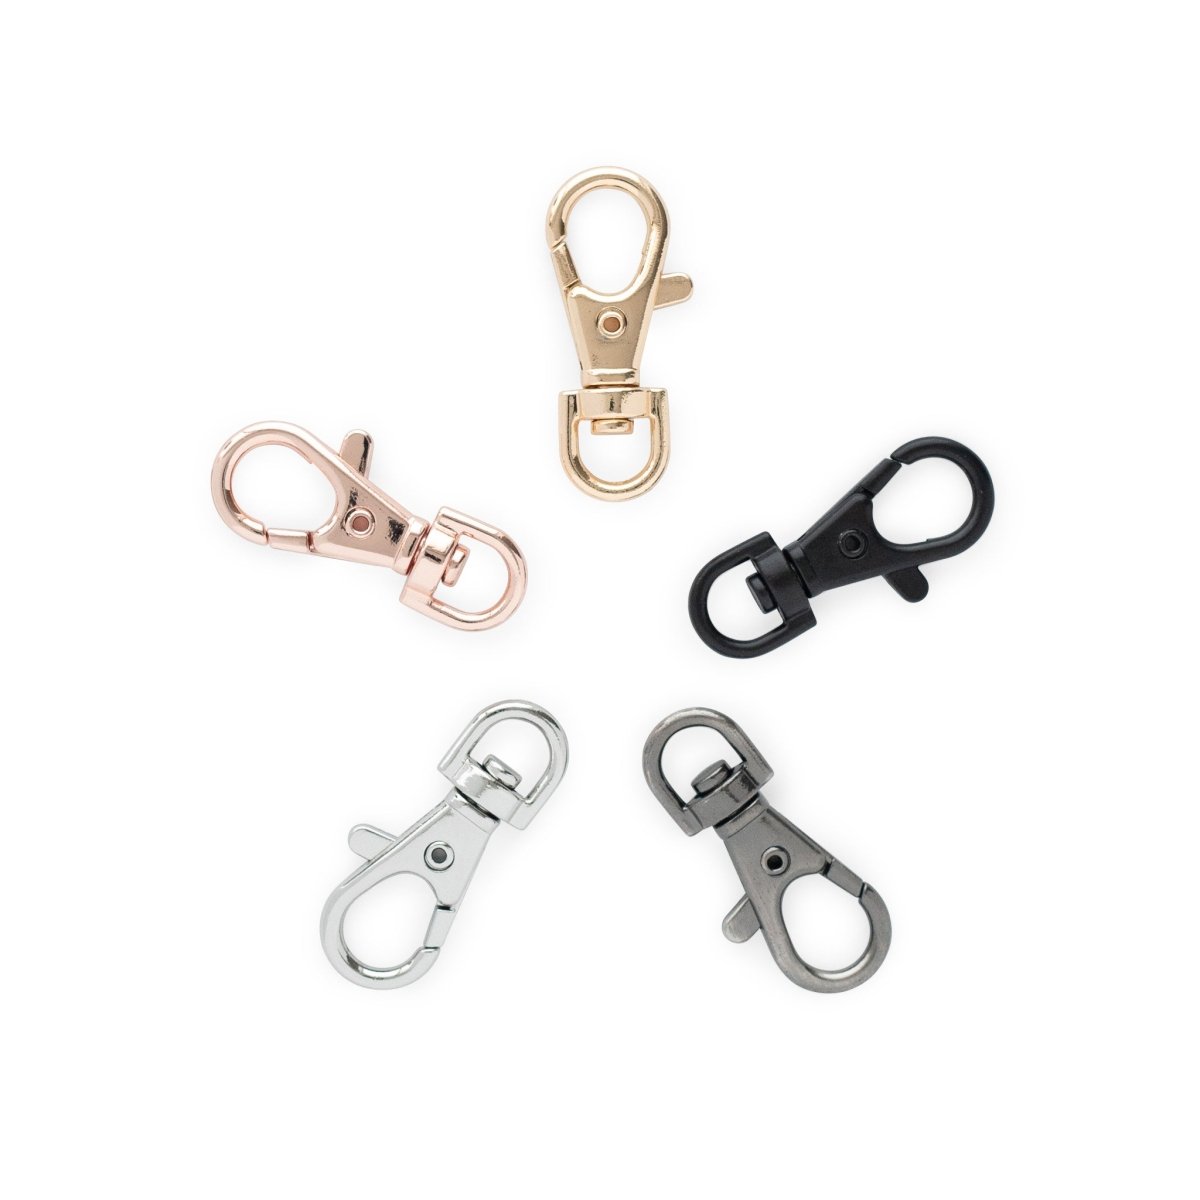 Premium Small Hook Lanyard Clip Assorted Pack